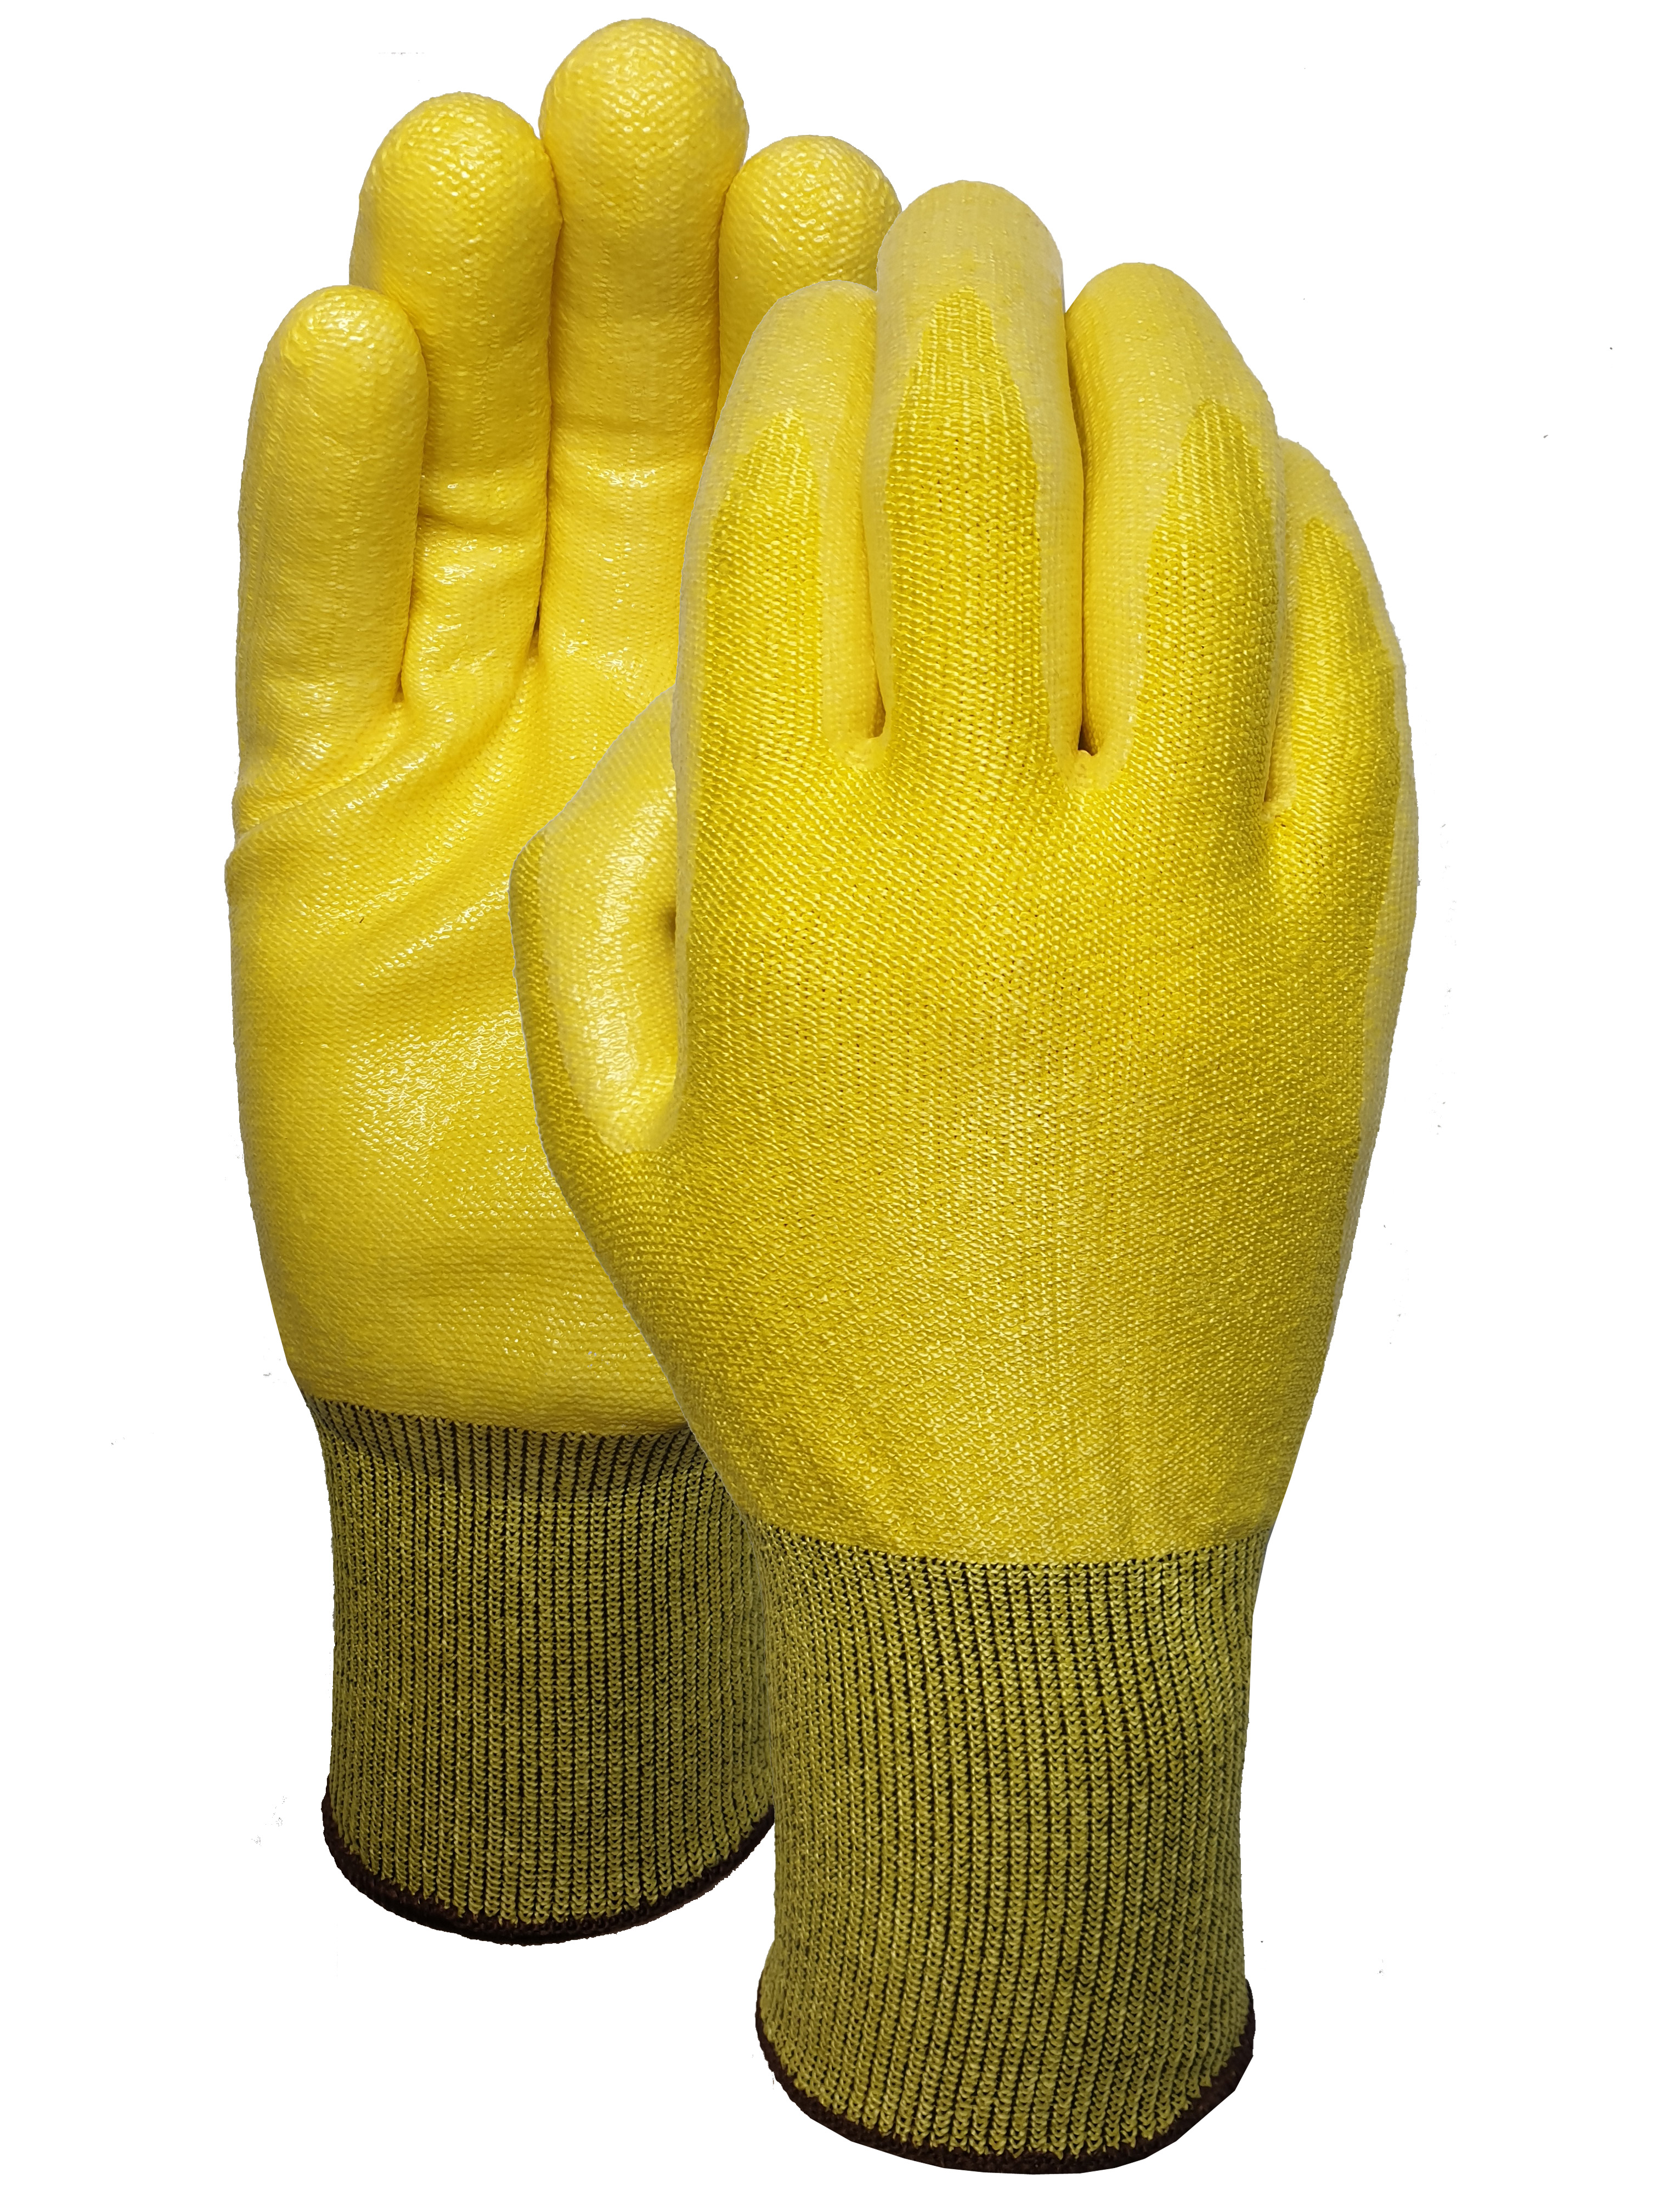 CUT 3 Yellow HPPE with Nitrile foam glove